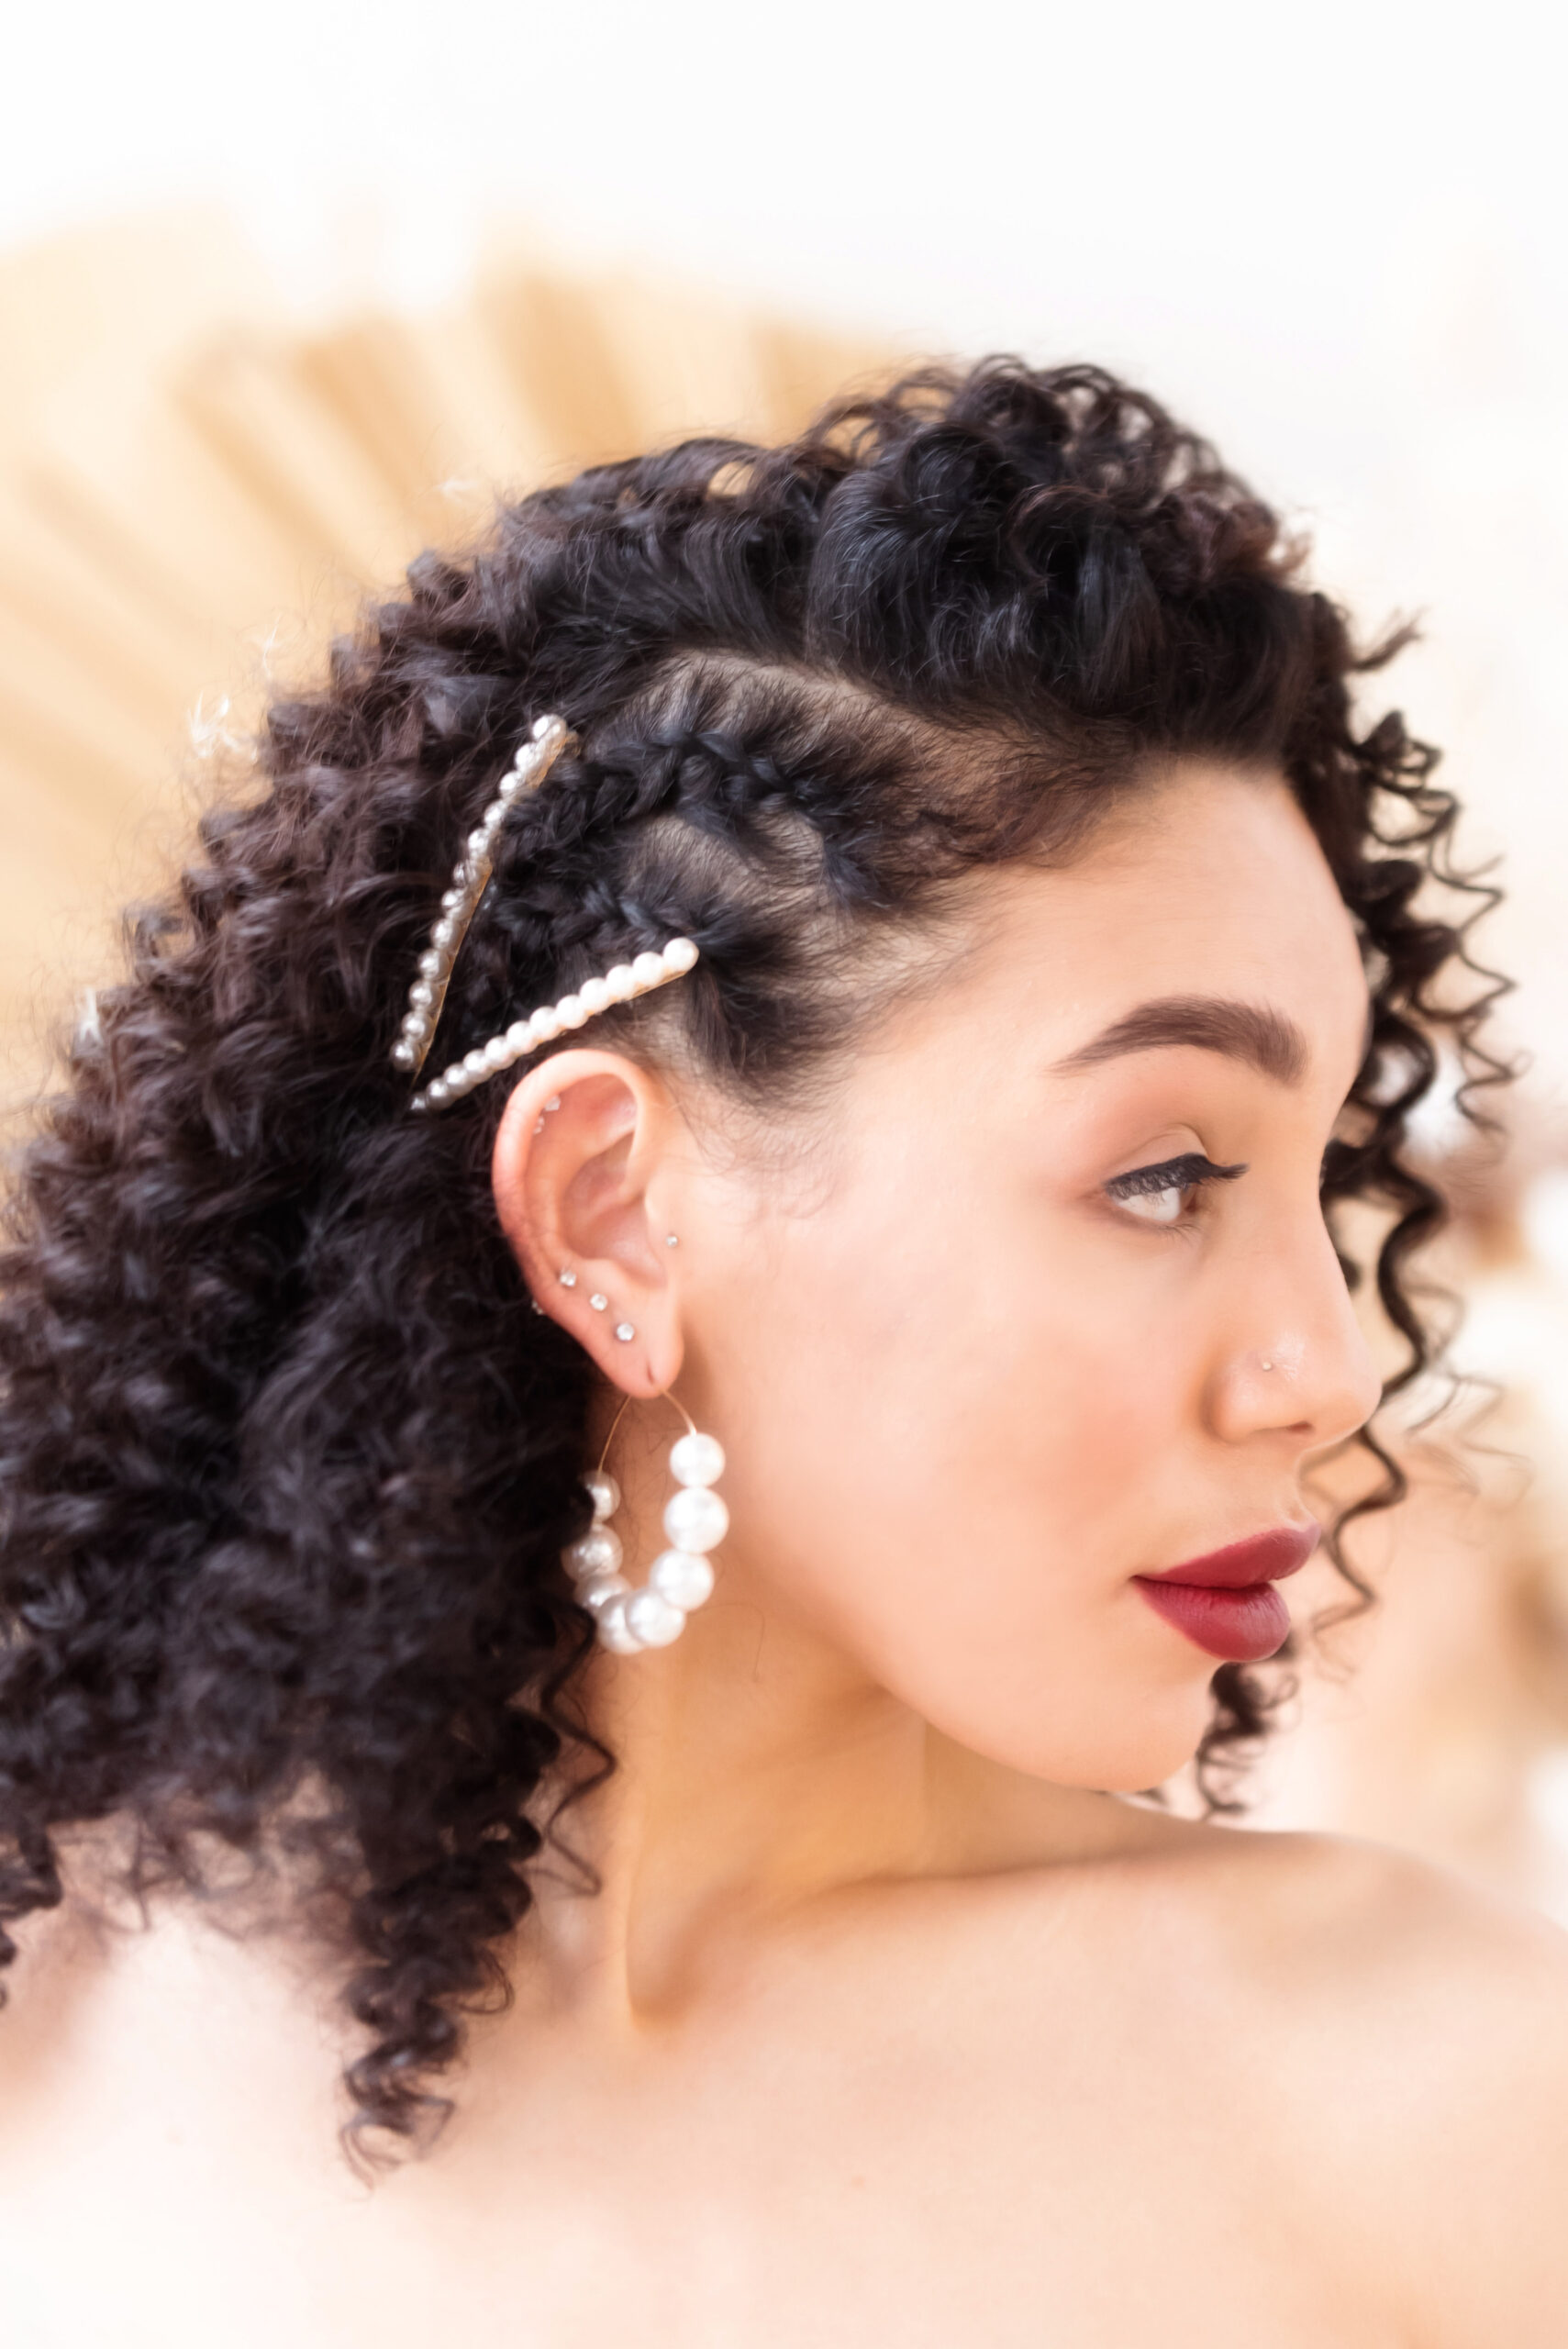 Bride with natural curls, pearlized hair clips and dramatic red lips